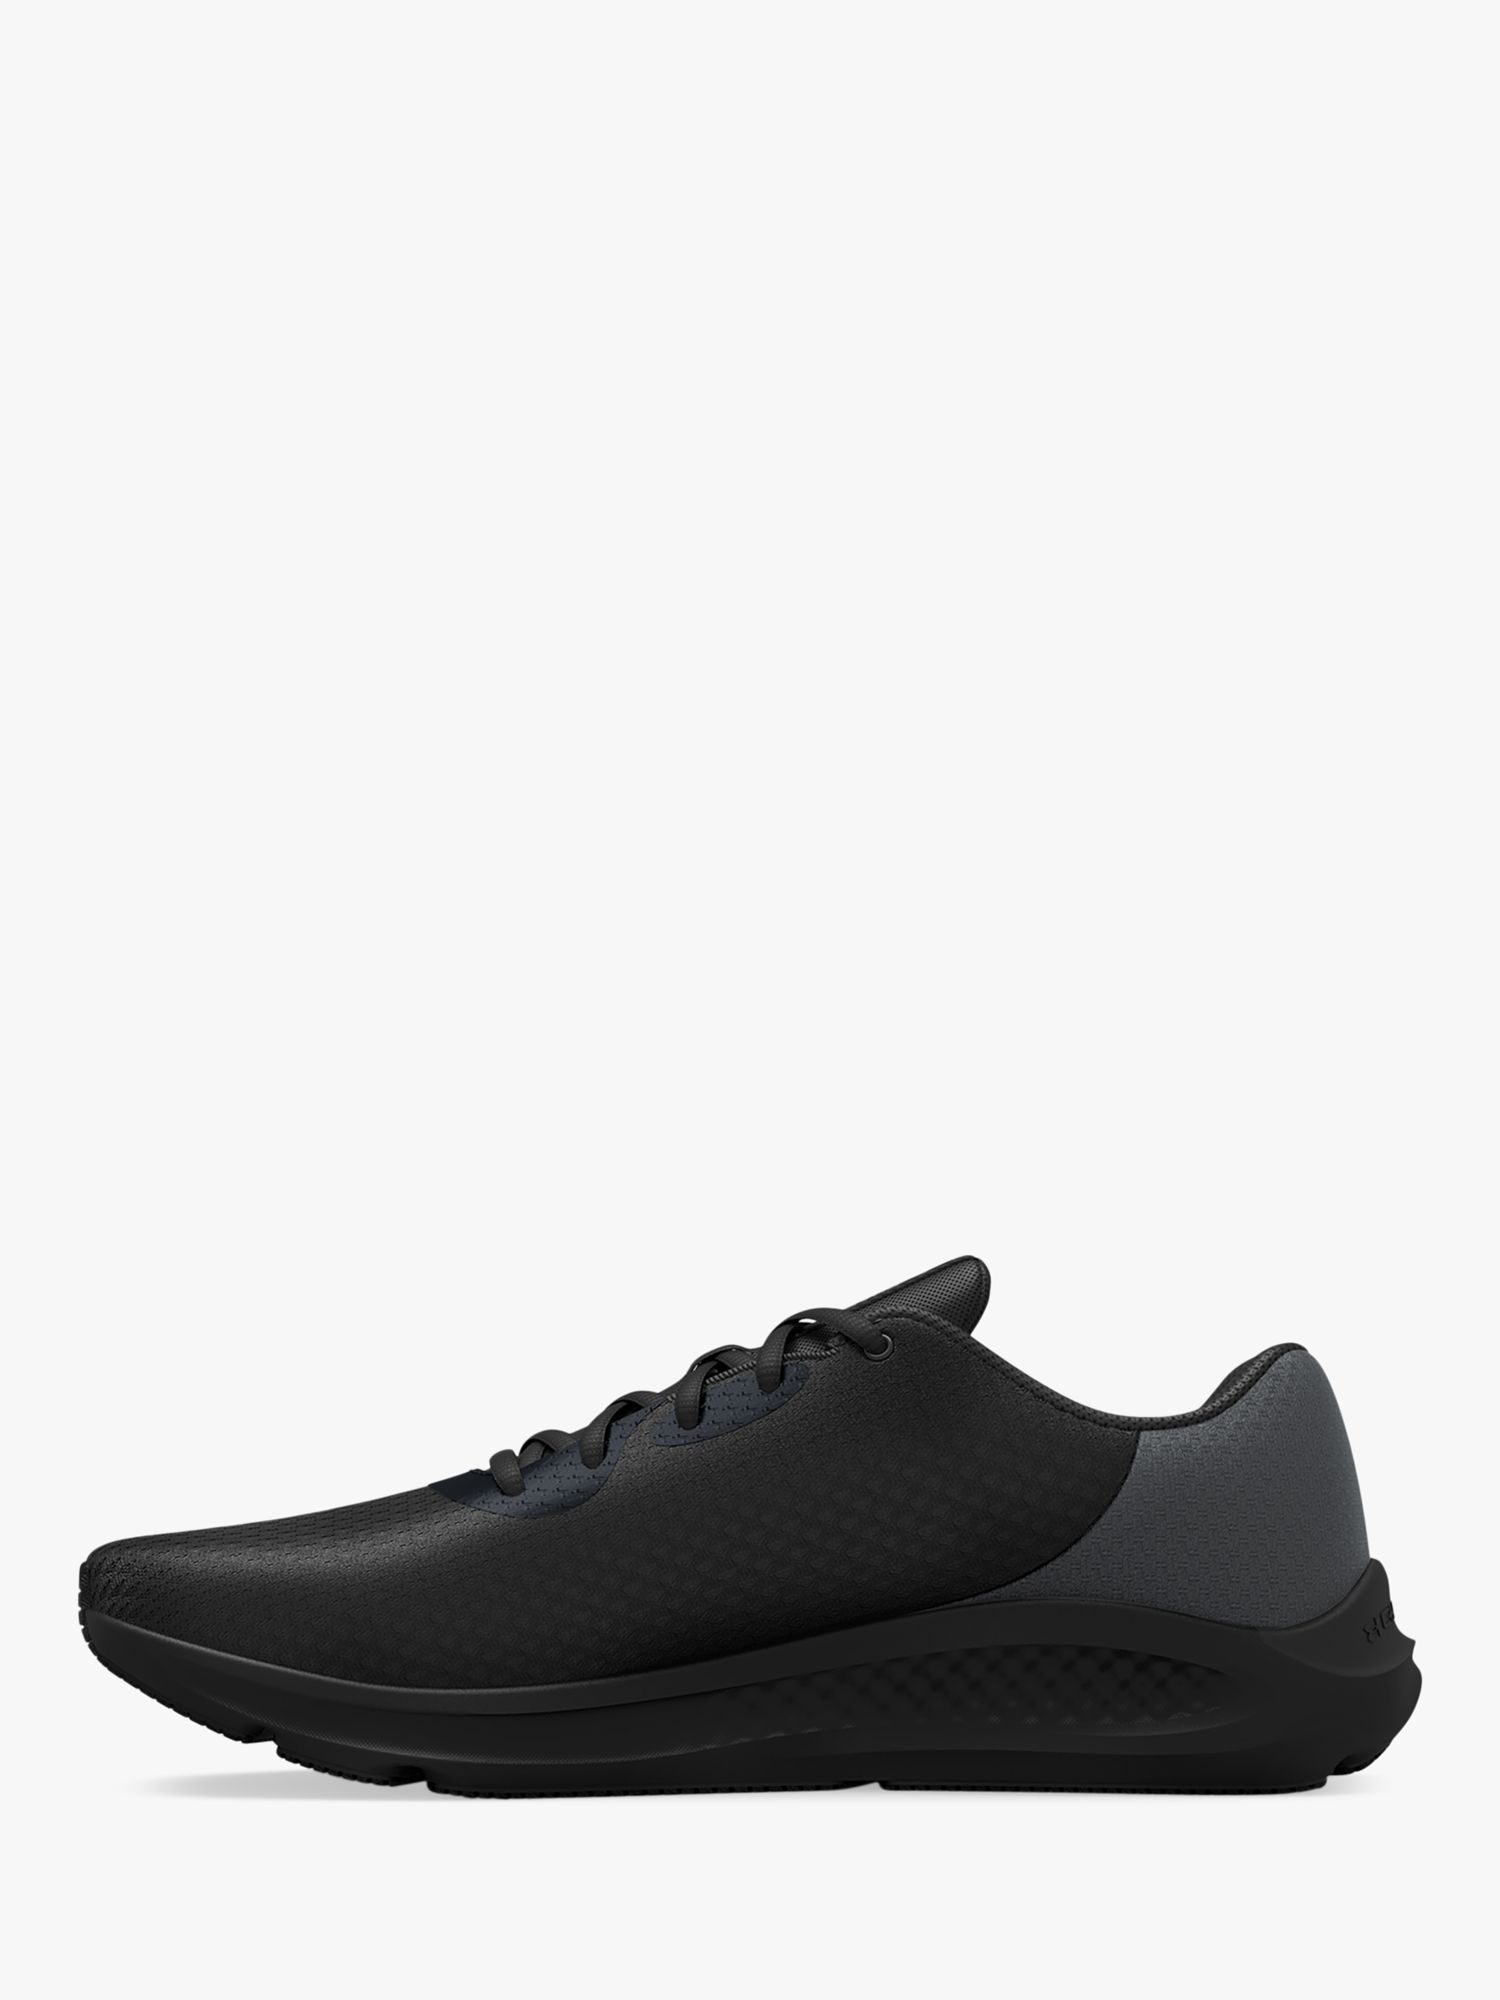 Under Armour Men's UA Charged Pursuit 3 Running Shoes - Black/White